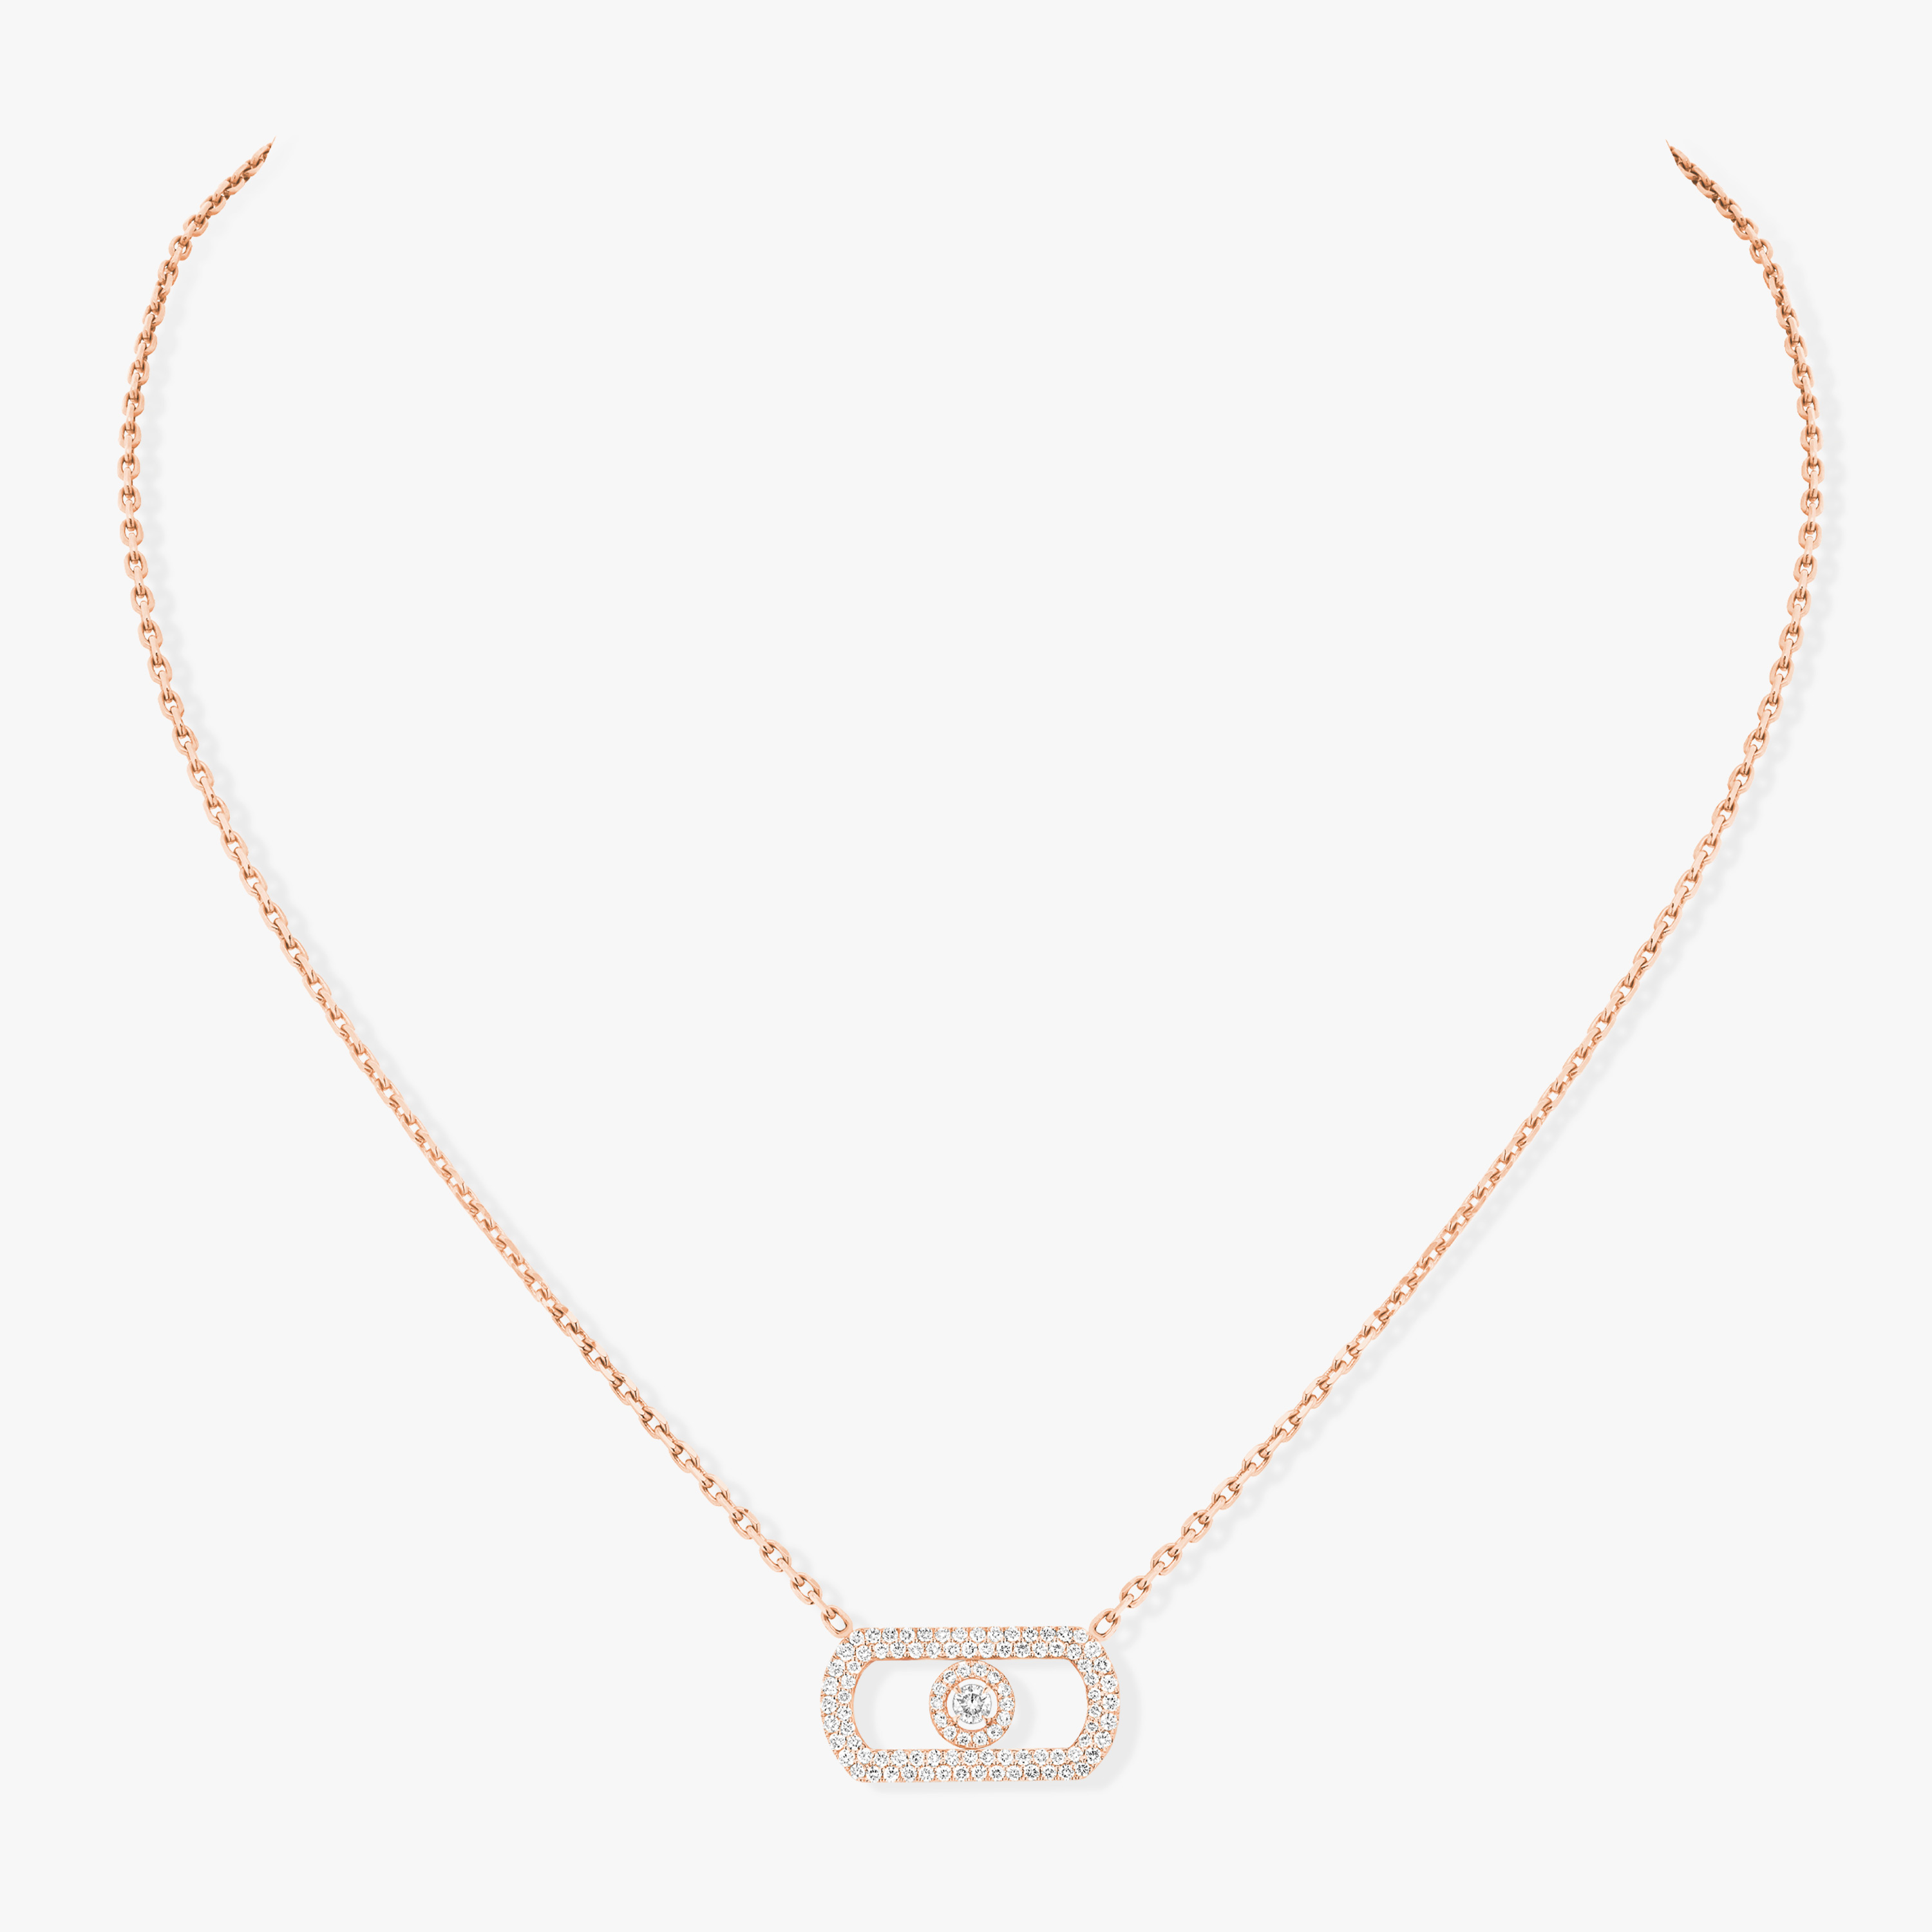 Necklace For Her Pink Gold Diamond So Move Pavé 12945-PG